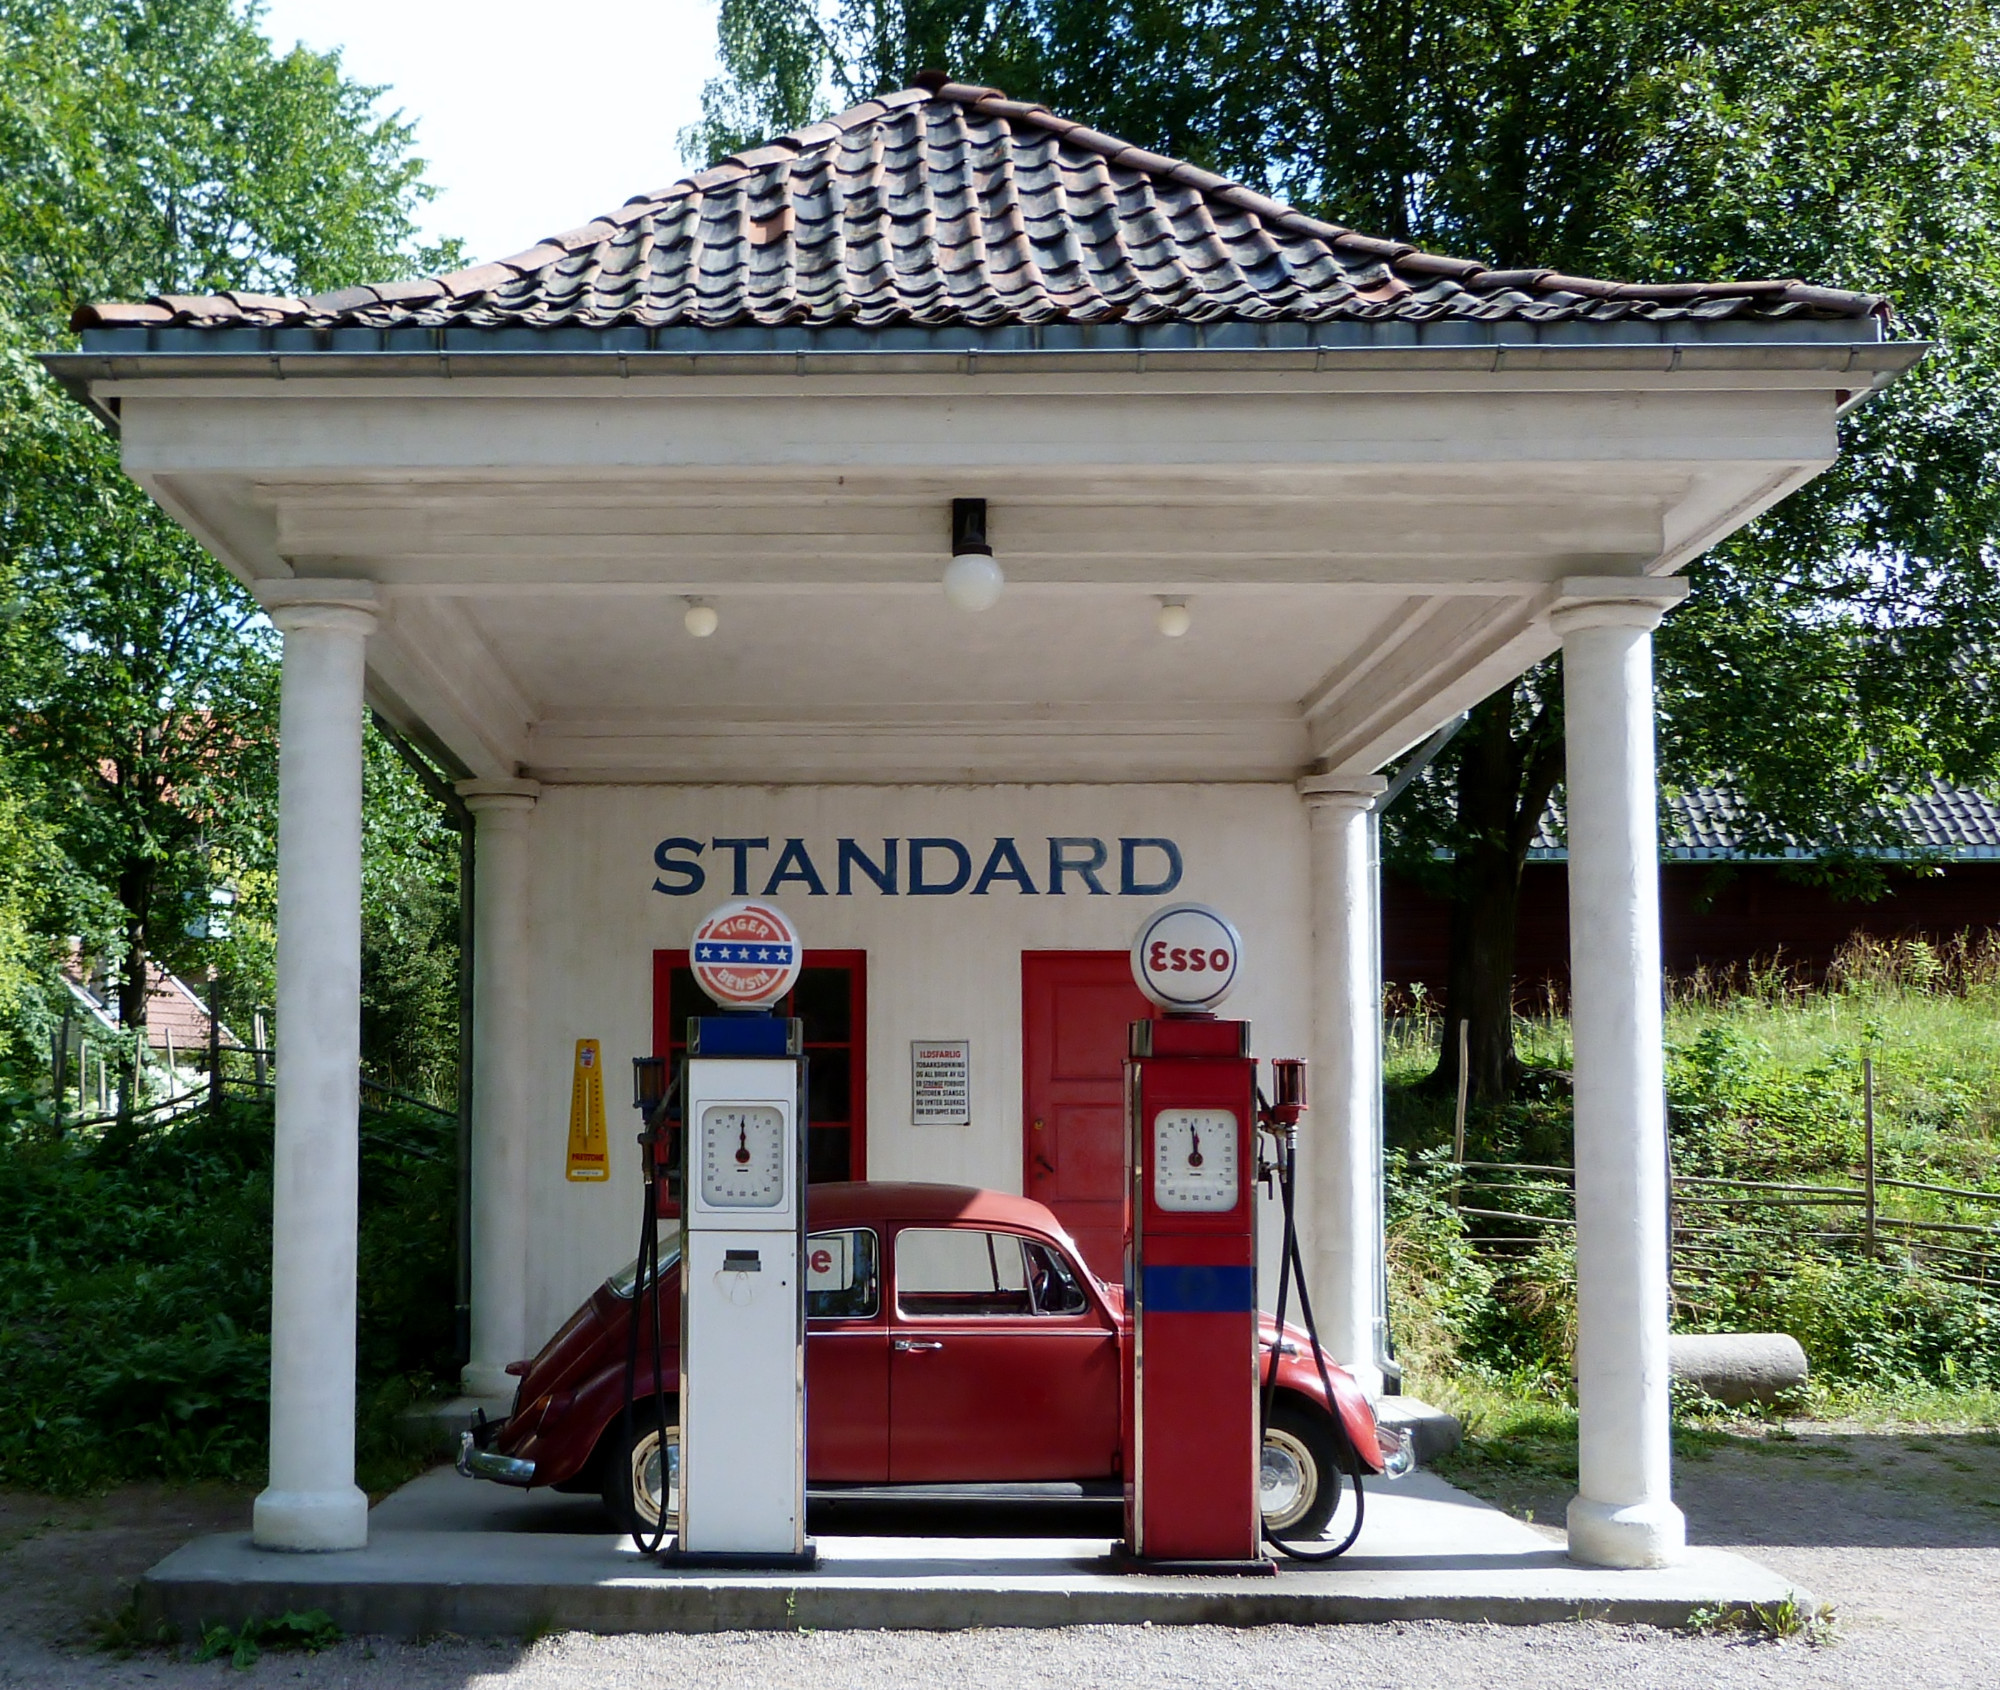 Copy of Gas Station from Holmestrand, 1928.